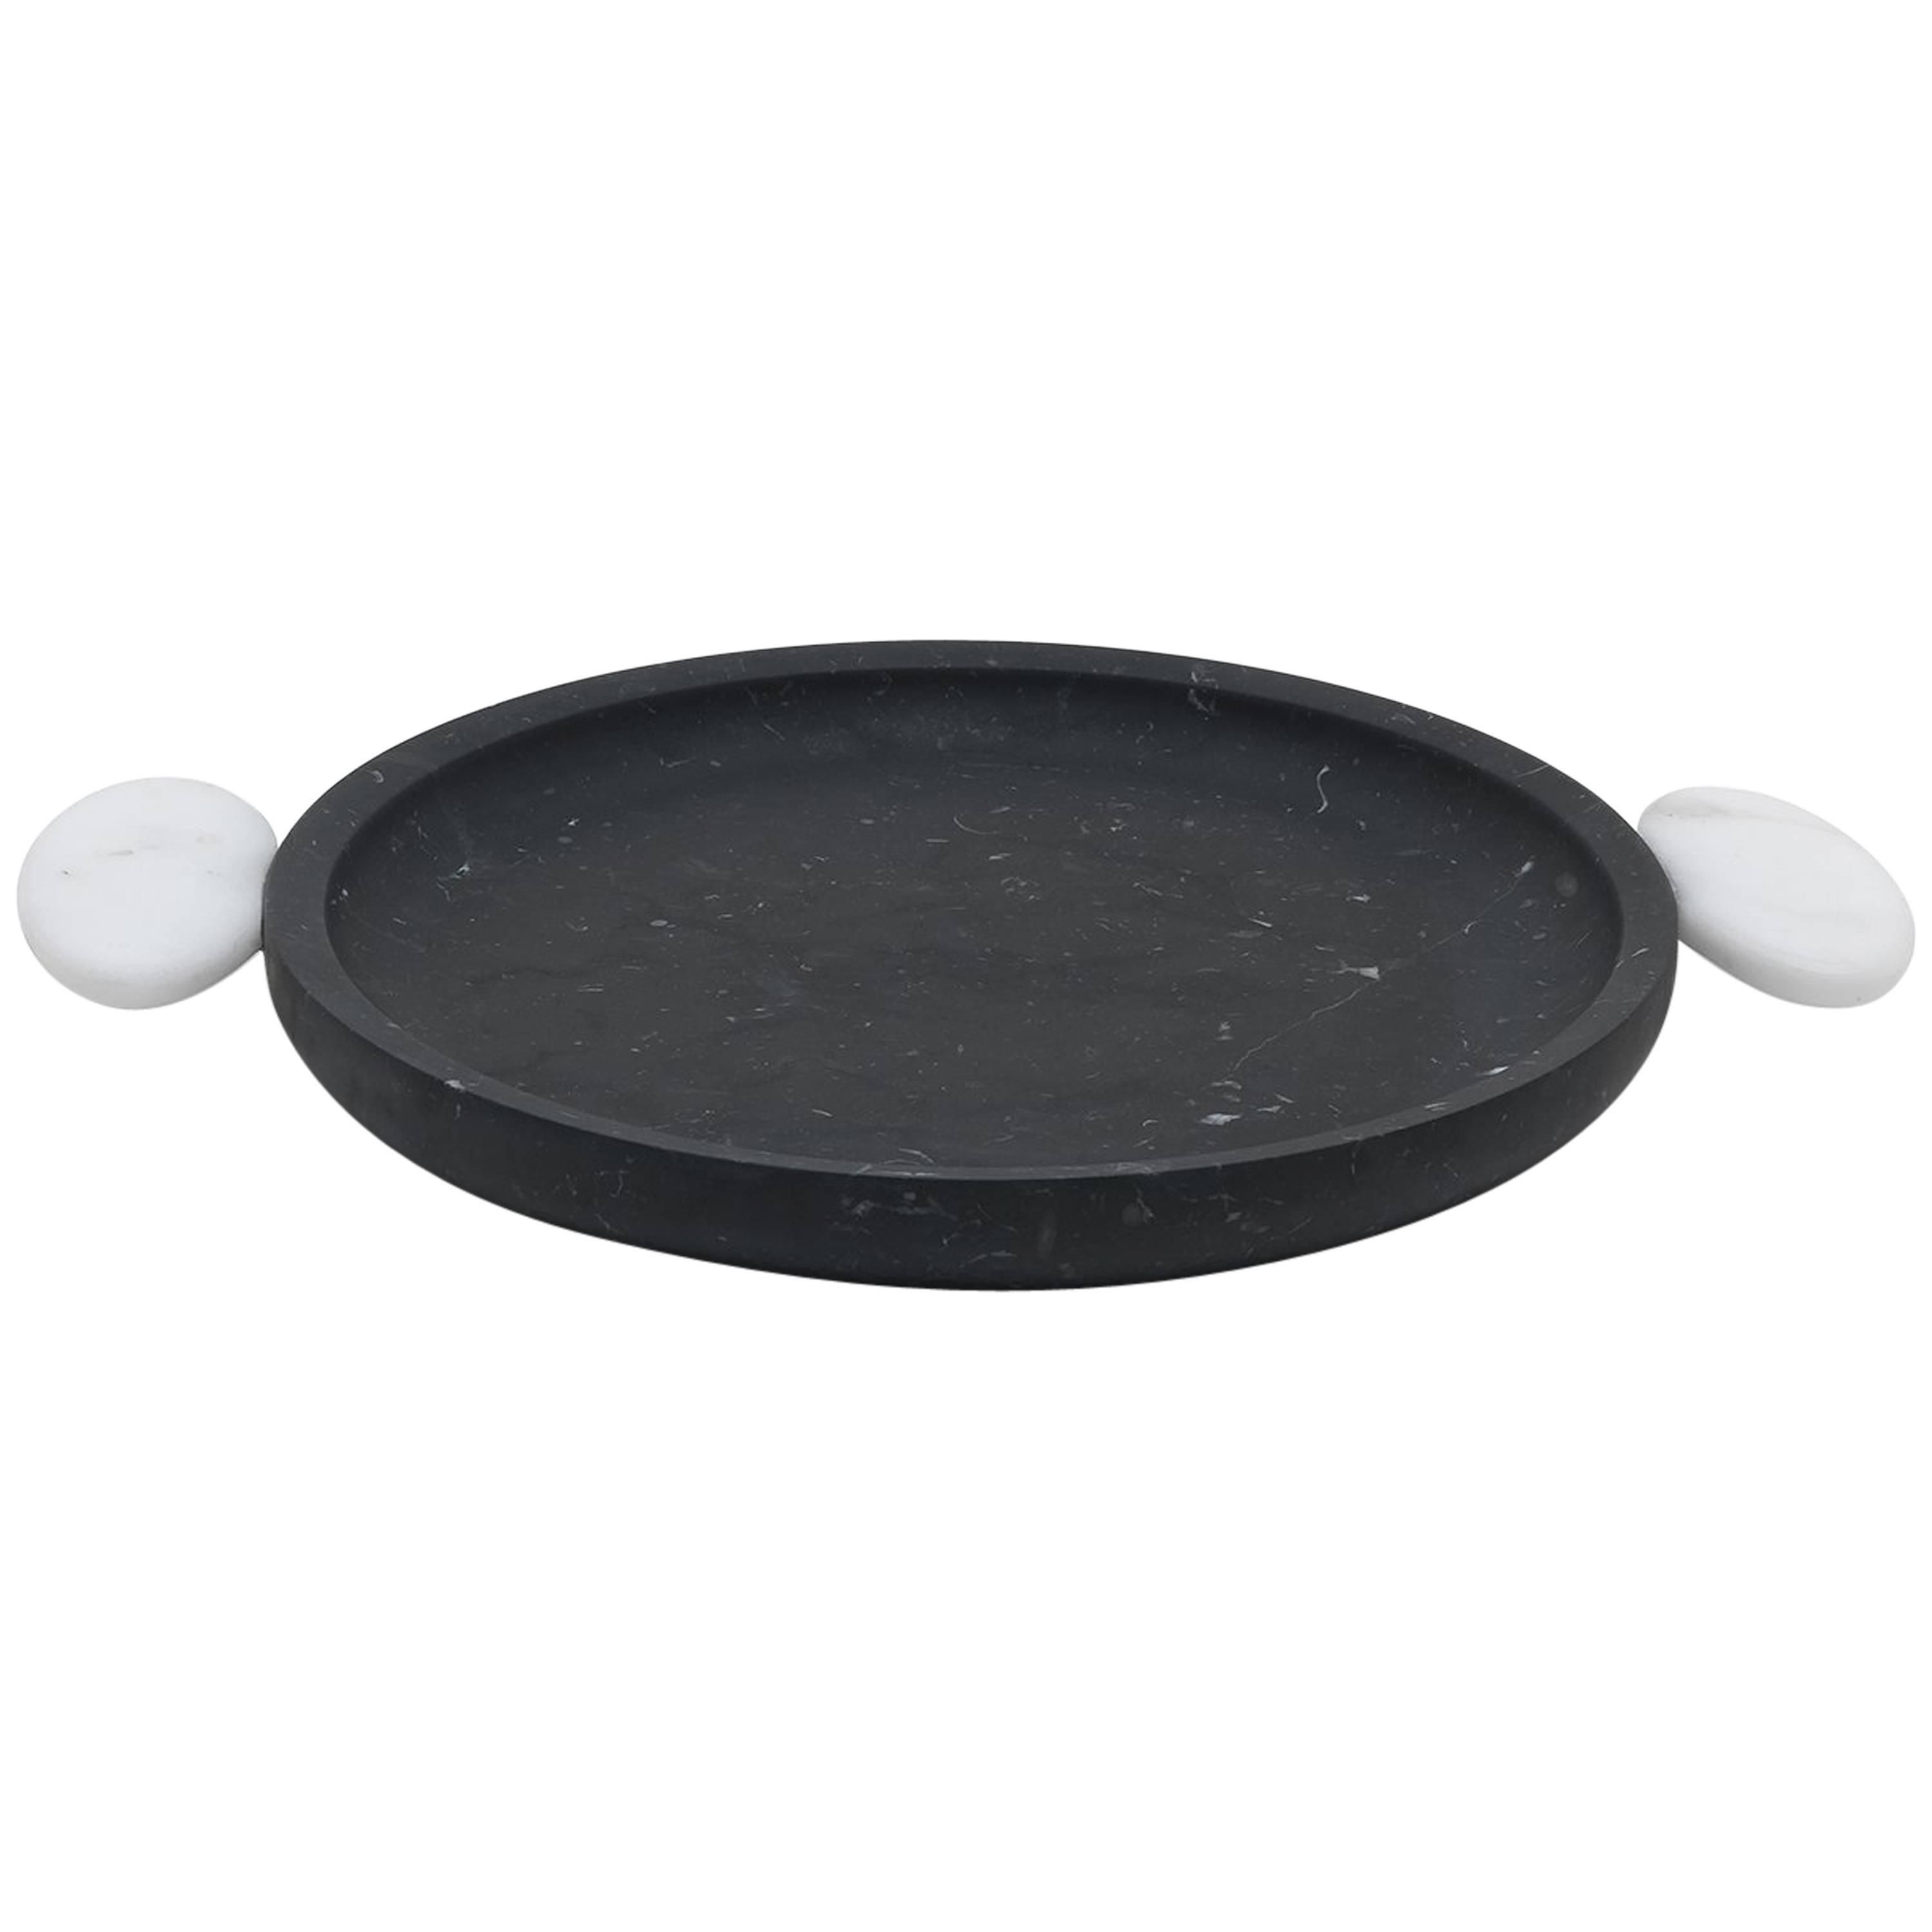 New Modern Serving Tray in Nero and White Marble, creator Matteo Cibic